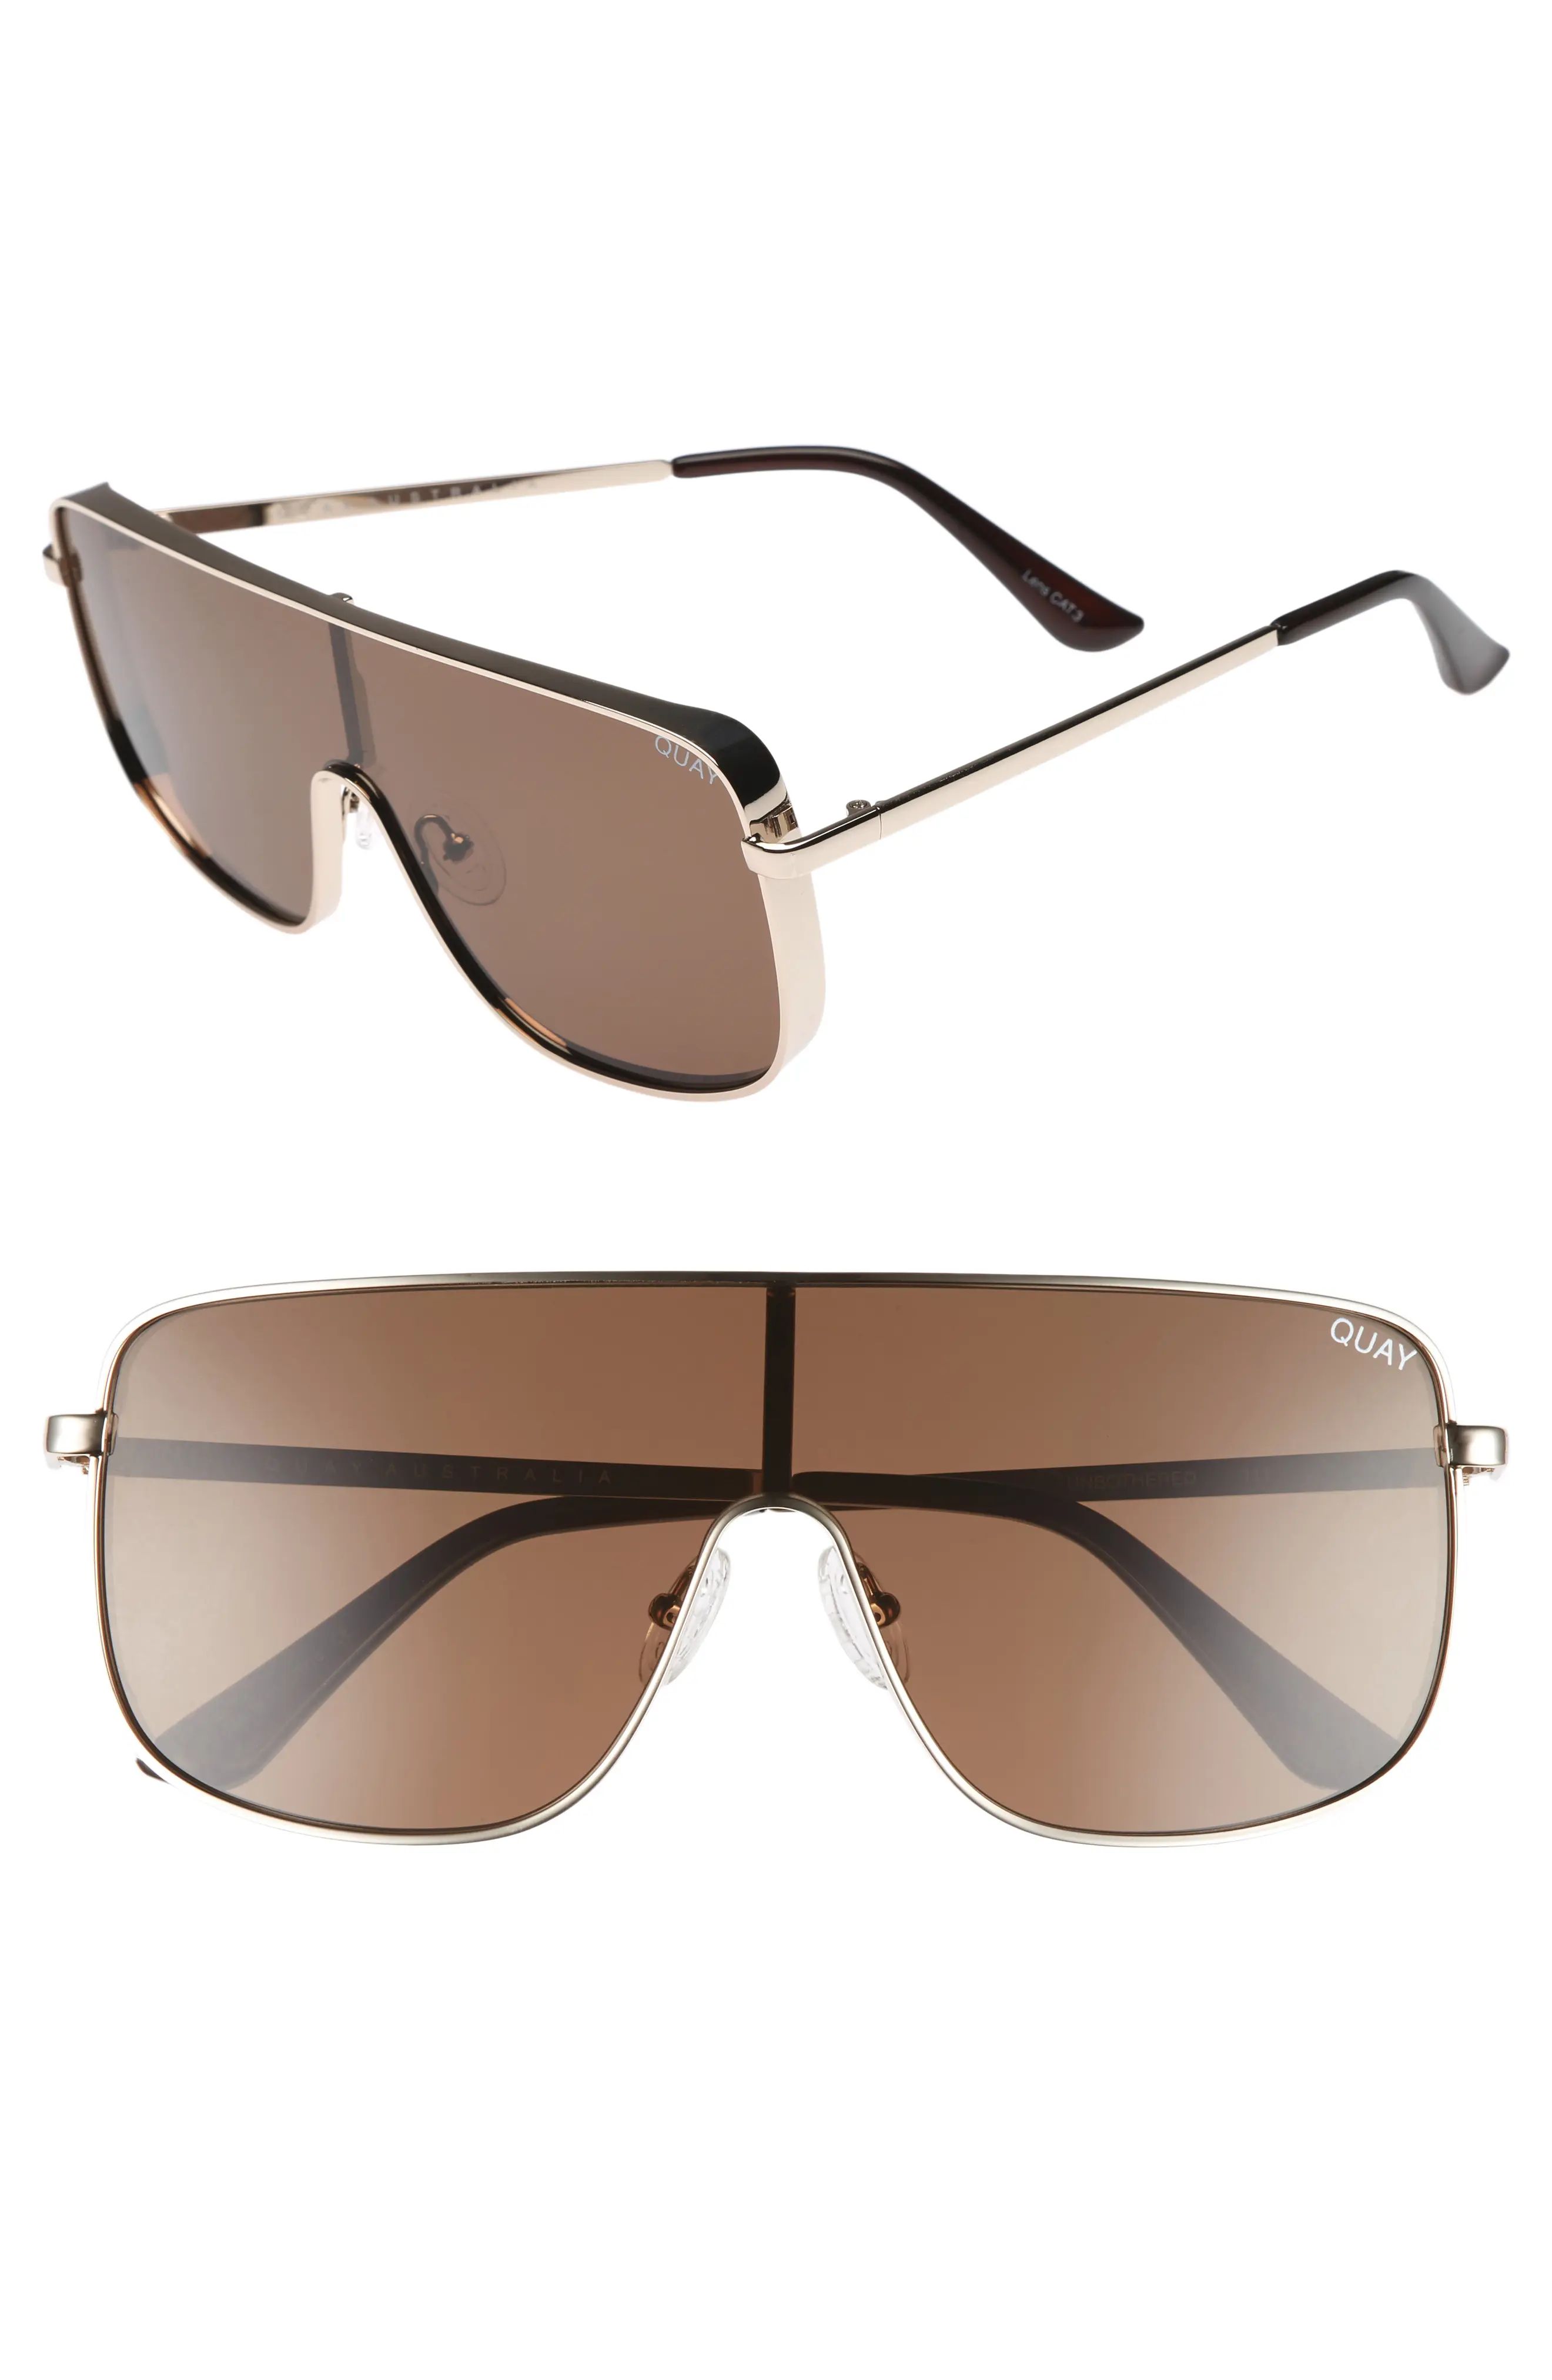 #QUAYxKYLIE Unbothered 68mm Shield Sunglasses | Nordstrom